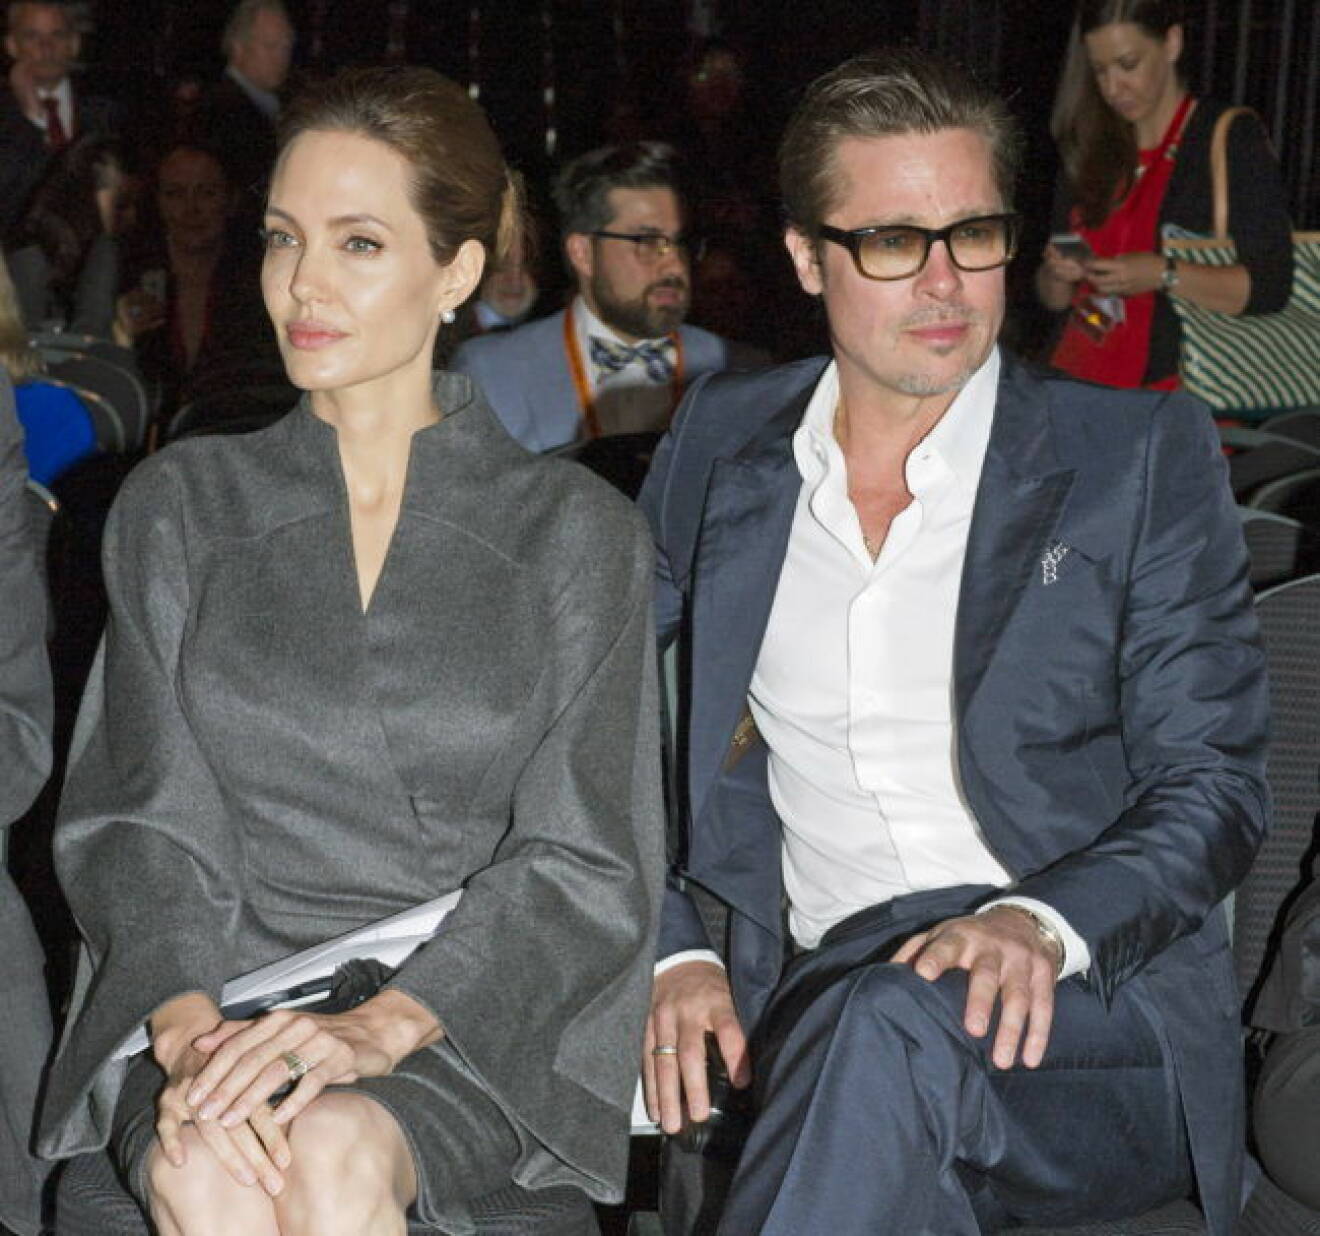 20.09.2016: BRANGELINA NO MORE - ANGELINA JOLIE FILES FOR DIVORCE FROM BRAD PITT Jolie filed for divorce from Pitt for 'the health of her family', two years after the couple wed at their French estate Chateau Miraval.The actress filed papers on Monday citing irreconcilable differences as the reason for the split and asking for physical custody of the couple's six children - Maddox, age 15; Pax, aged 12; Zahara, aged 11; Shiloh, aged 10; and twins Vivienne and Knox, aged eight. 13.06.2014, LONDON: ANGELINA JOLIE AND BRAD PITT attend the End Sexual Violence In Conflict Summit at the Excel, London. Miss Jolie together William Hague is chairing the summit being held at the Excel, London Mandatory Photo Credit: Dias/NEWSPIX INTERNATIONAL **ALL FEES PAYABLE TO: "NEWSPIX INTERNATIONAL"** PHOTO CREDIT MANDATORY!!: NEWSPIX INTERNATIONAL(Failure to credit will incur a surcharge of 100% of reproduction fees) IMMEDIATE CONFIRMATION OF USAGE REQUIRED: Newspix International, 31 Chinnery Hill, Bishop's Stortford, ENGLAND CM23 3PS Tel:+441279 324672 ; Fax: +441279656877 Mobile: 0777568 1153 e-mail: info@newspixinternational.co.uk (c) Newspix / IBL